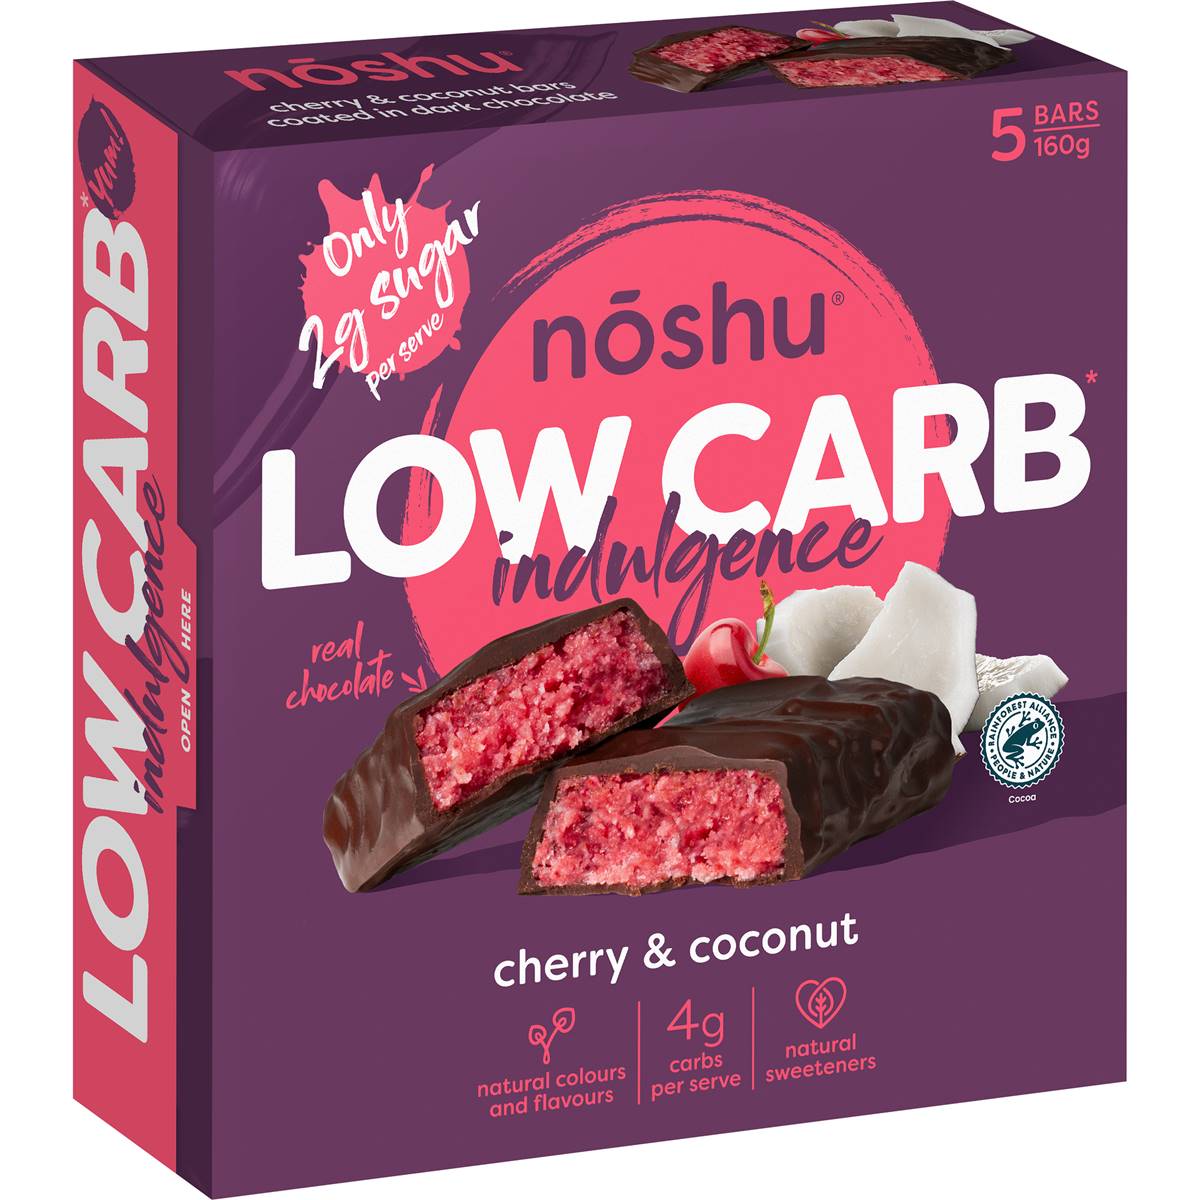 Calories in Noshu Low Carb Cherry & Coconut Indulgence Bars